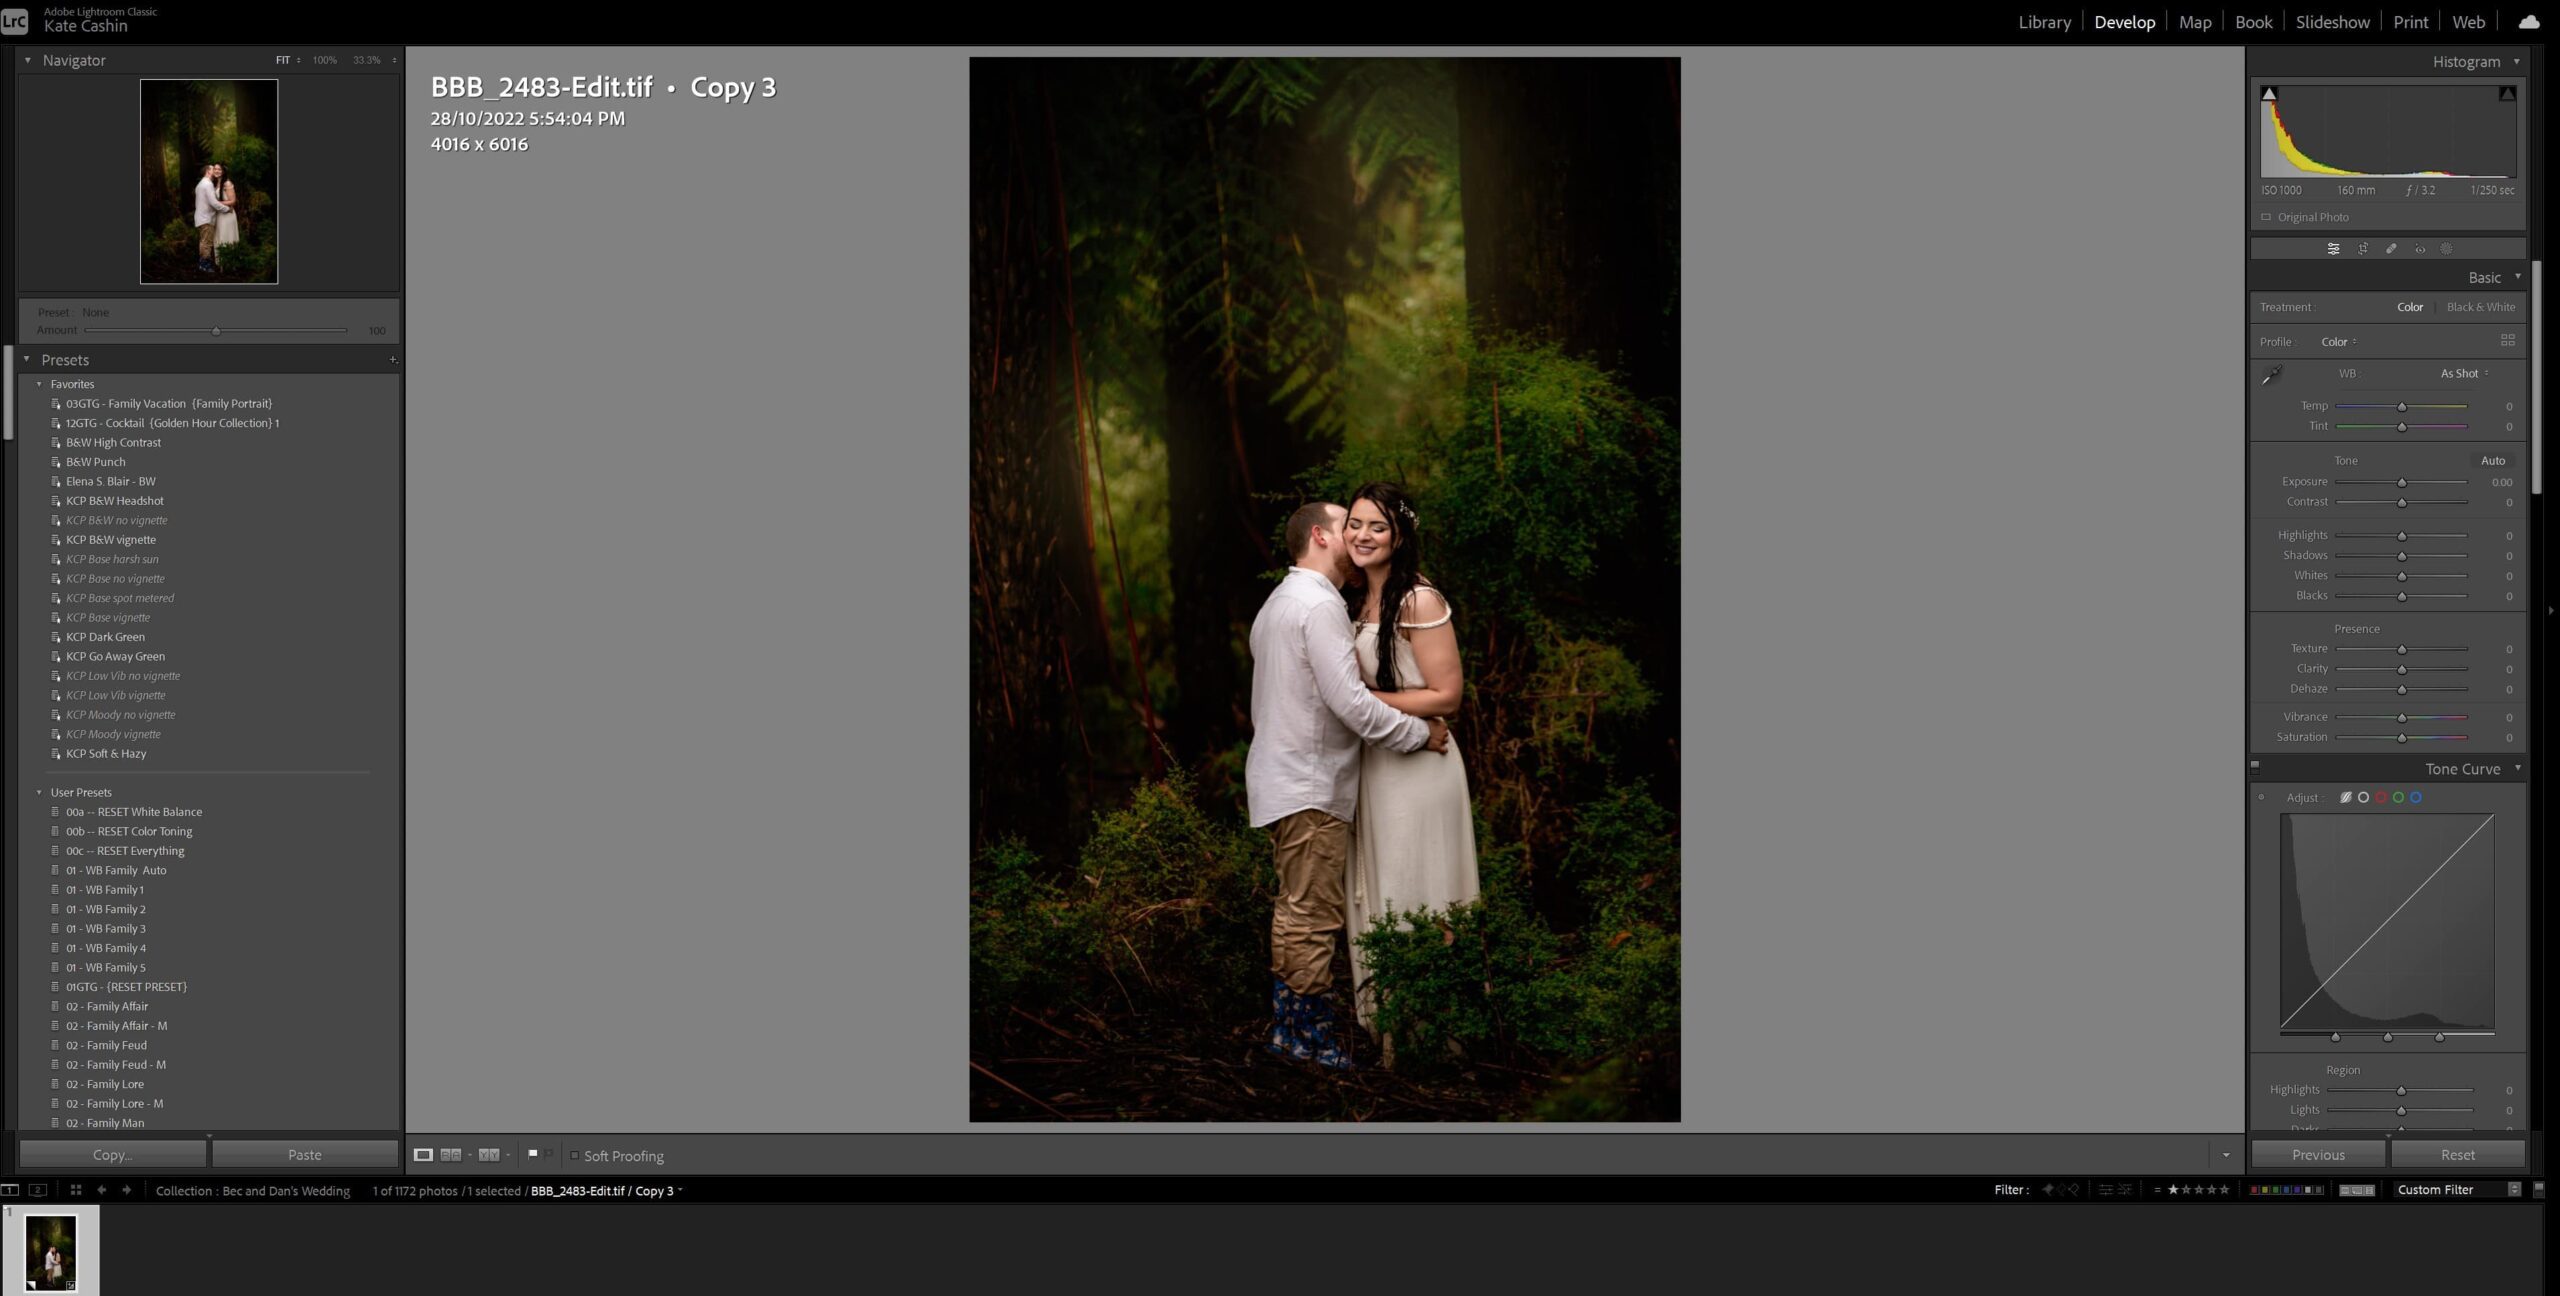 Lightroom display of a wedding portrait to demonstrate soft proofing